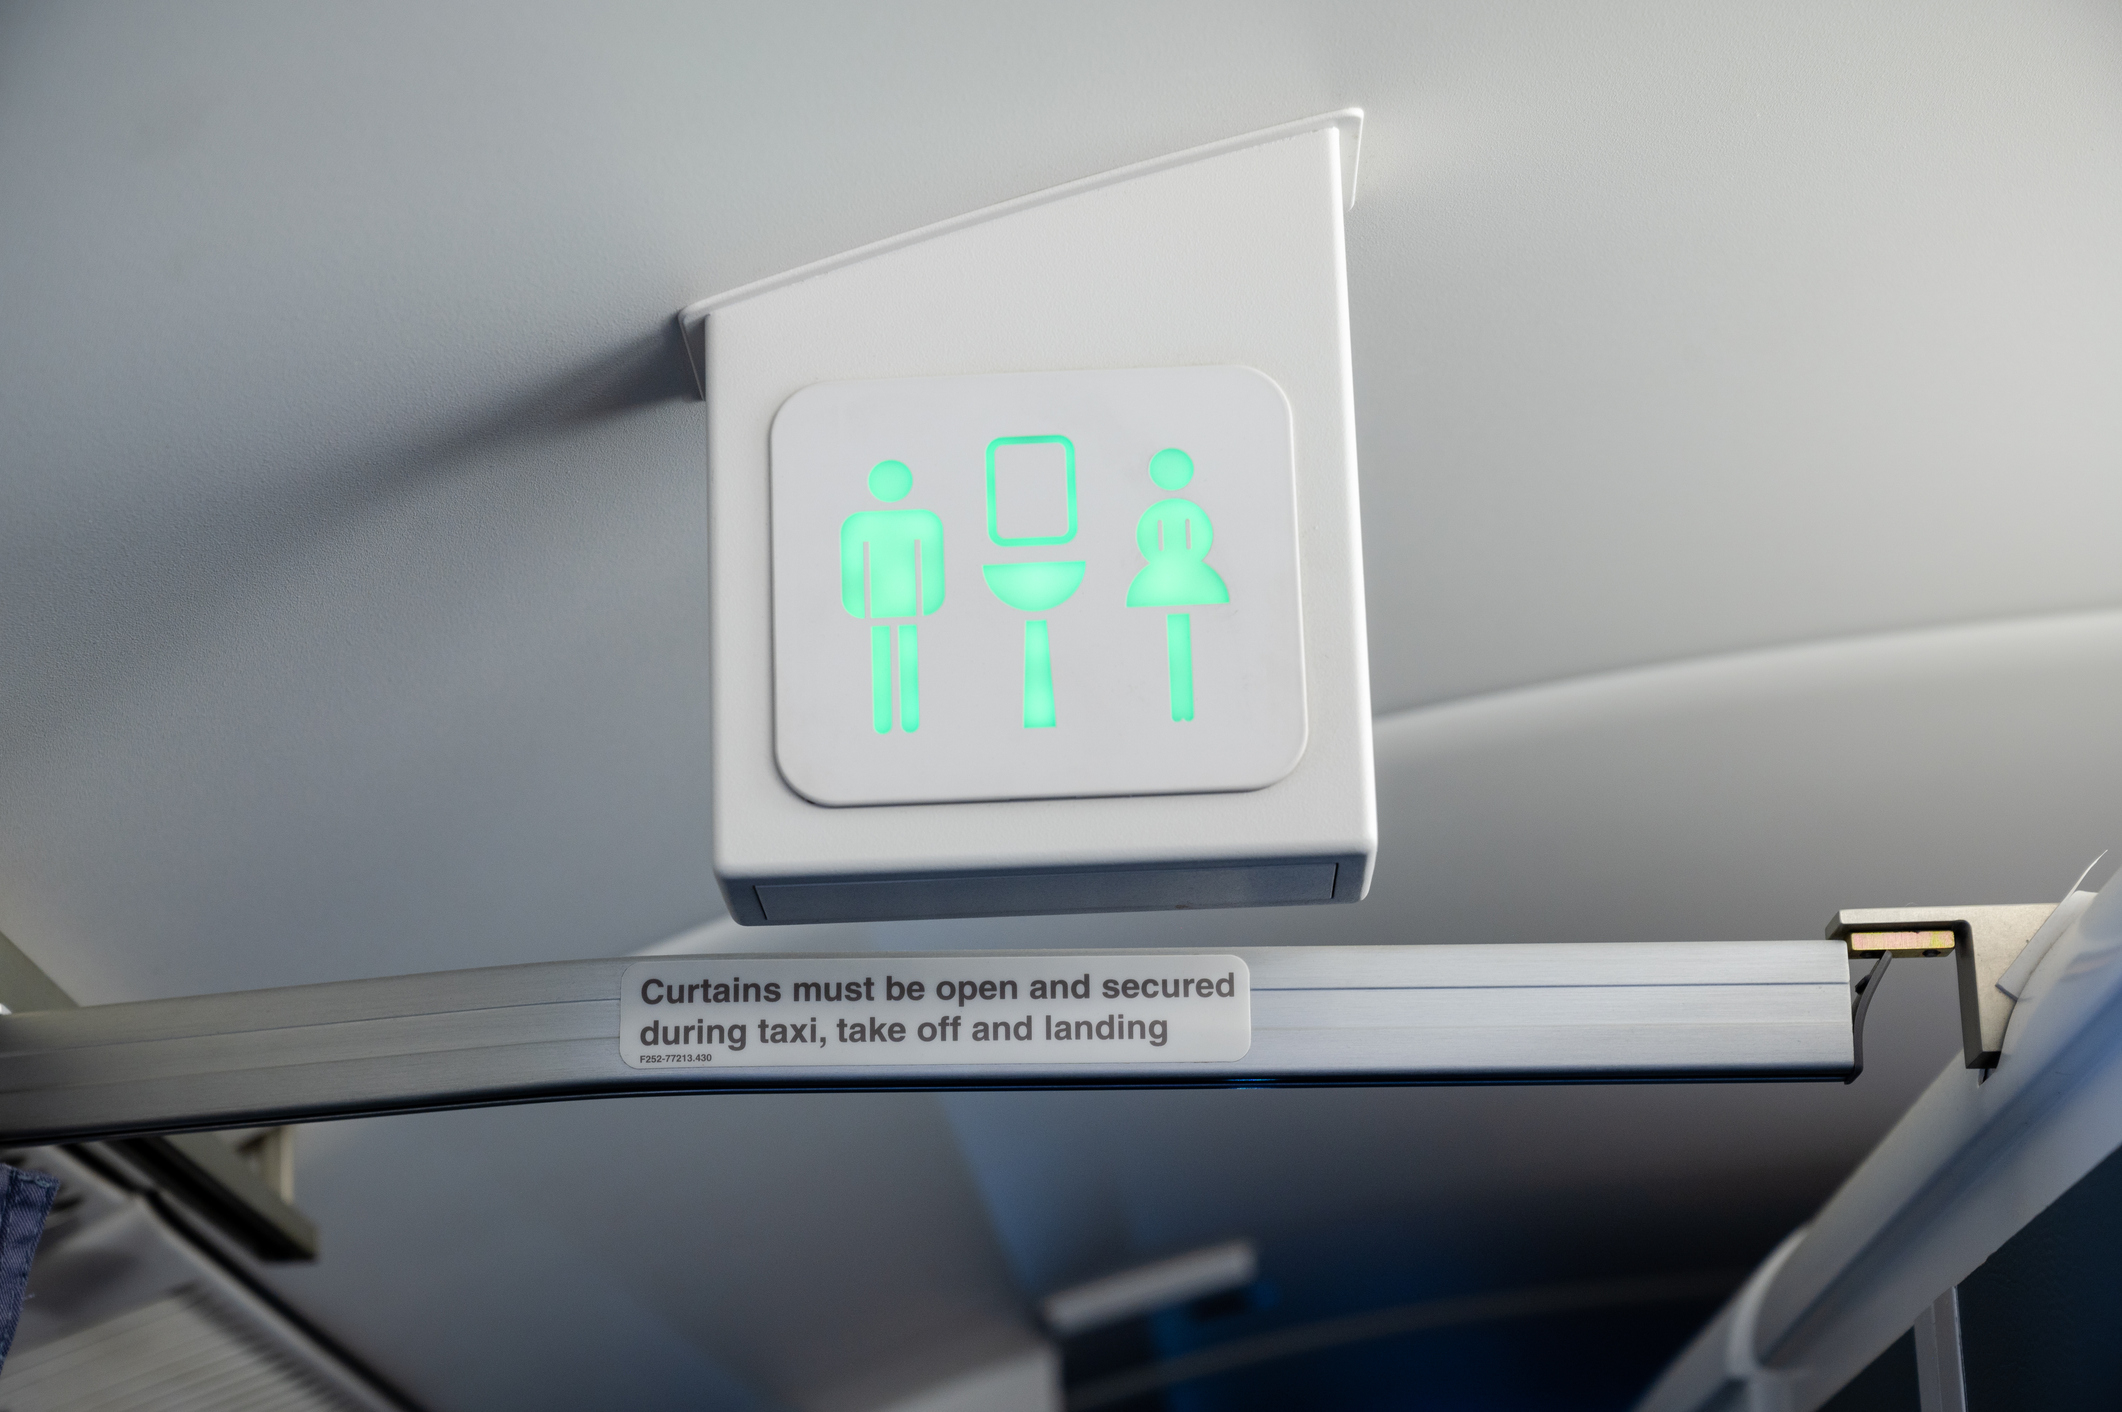 Illuminated airplane lavatory sign with figures, above a text reminder to secure curtains for takeoff/landing